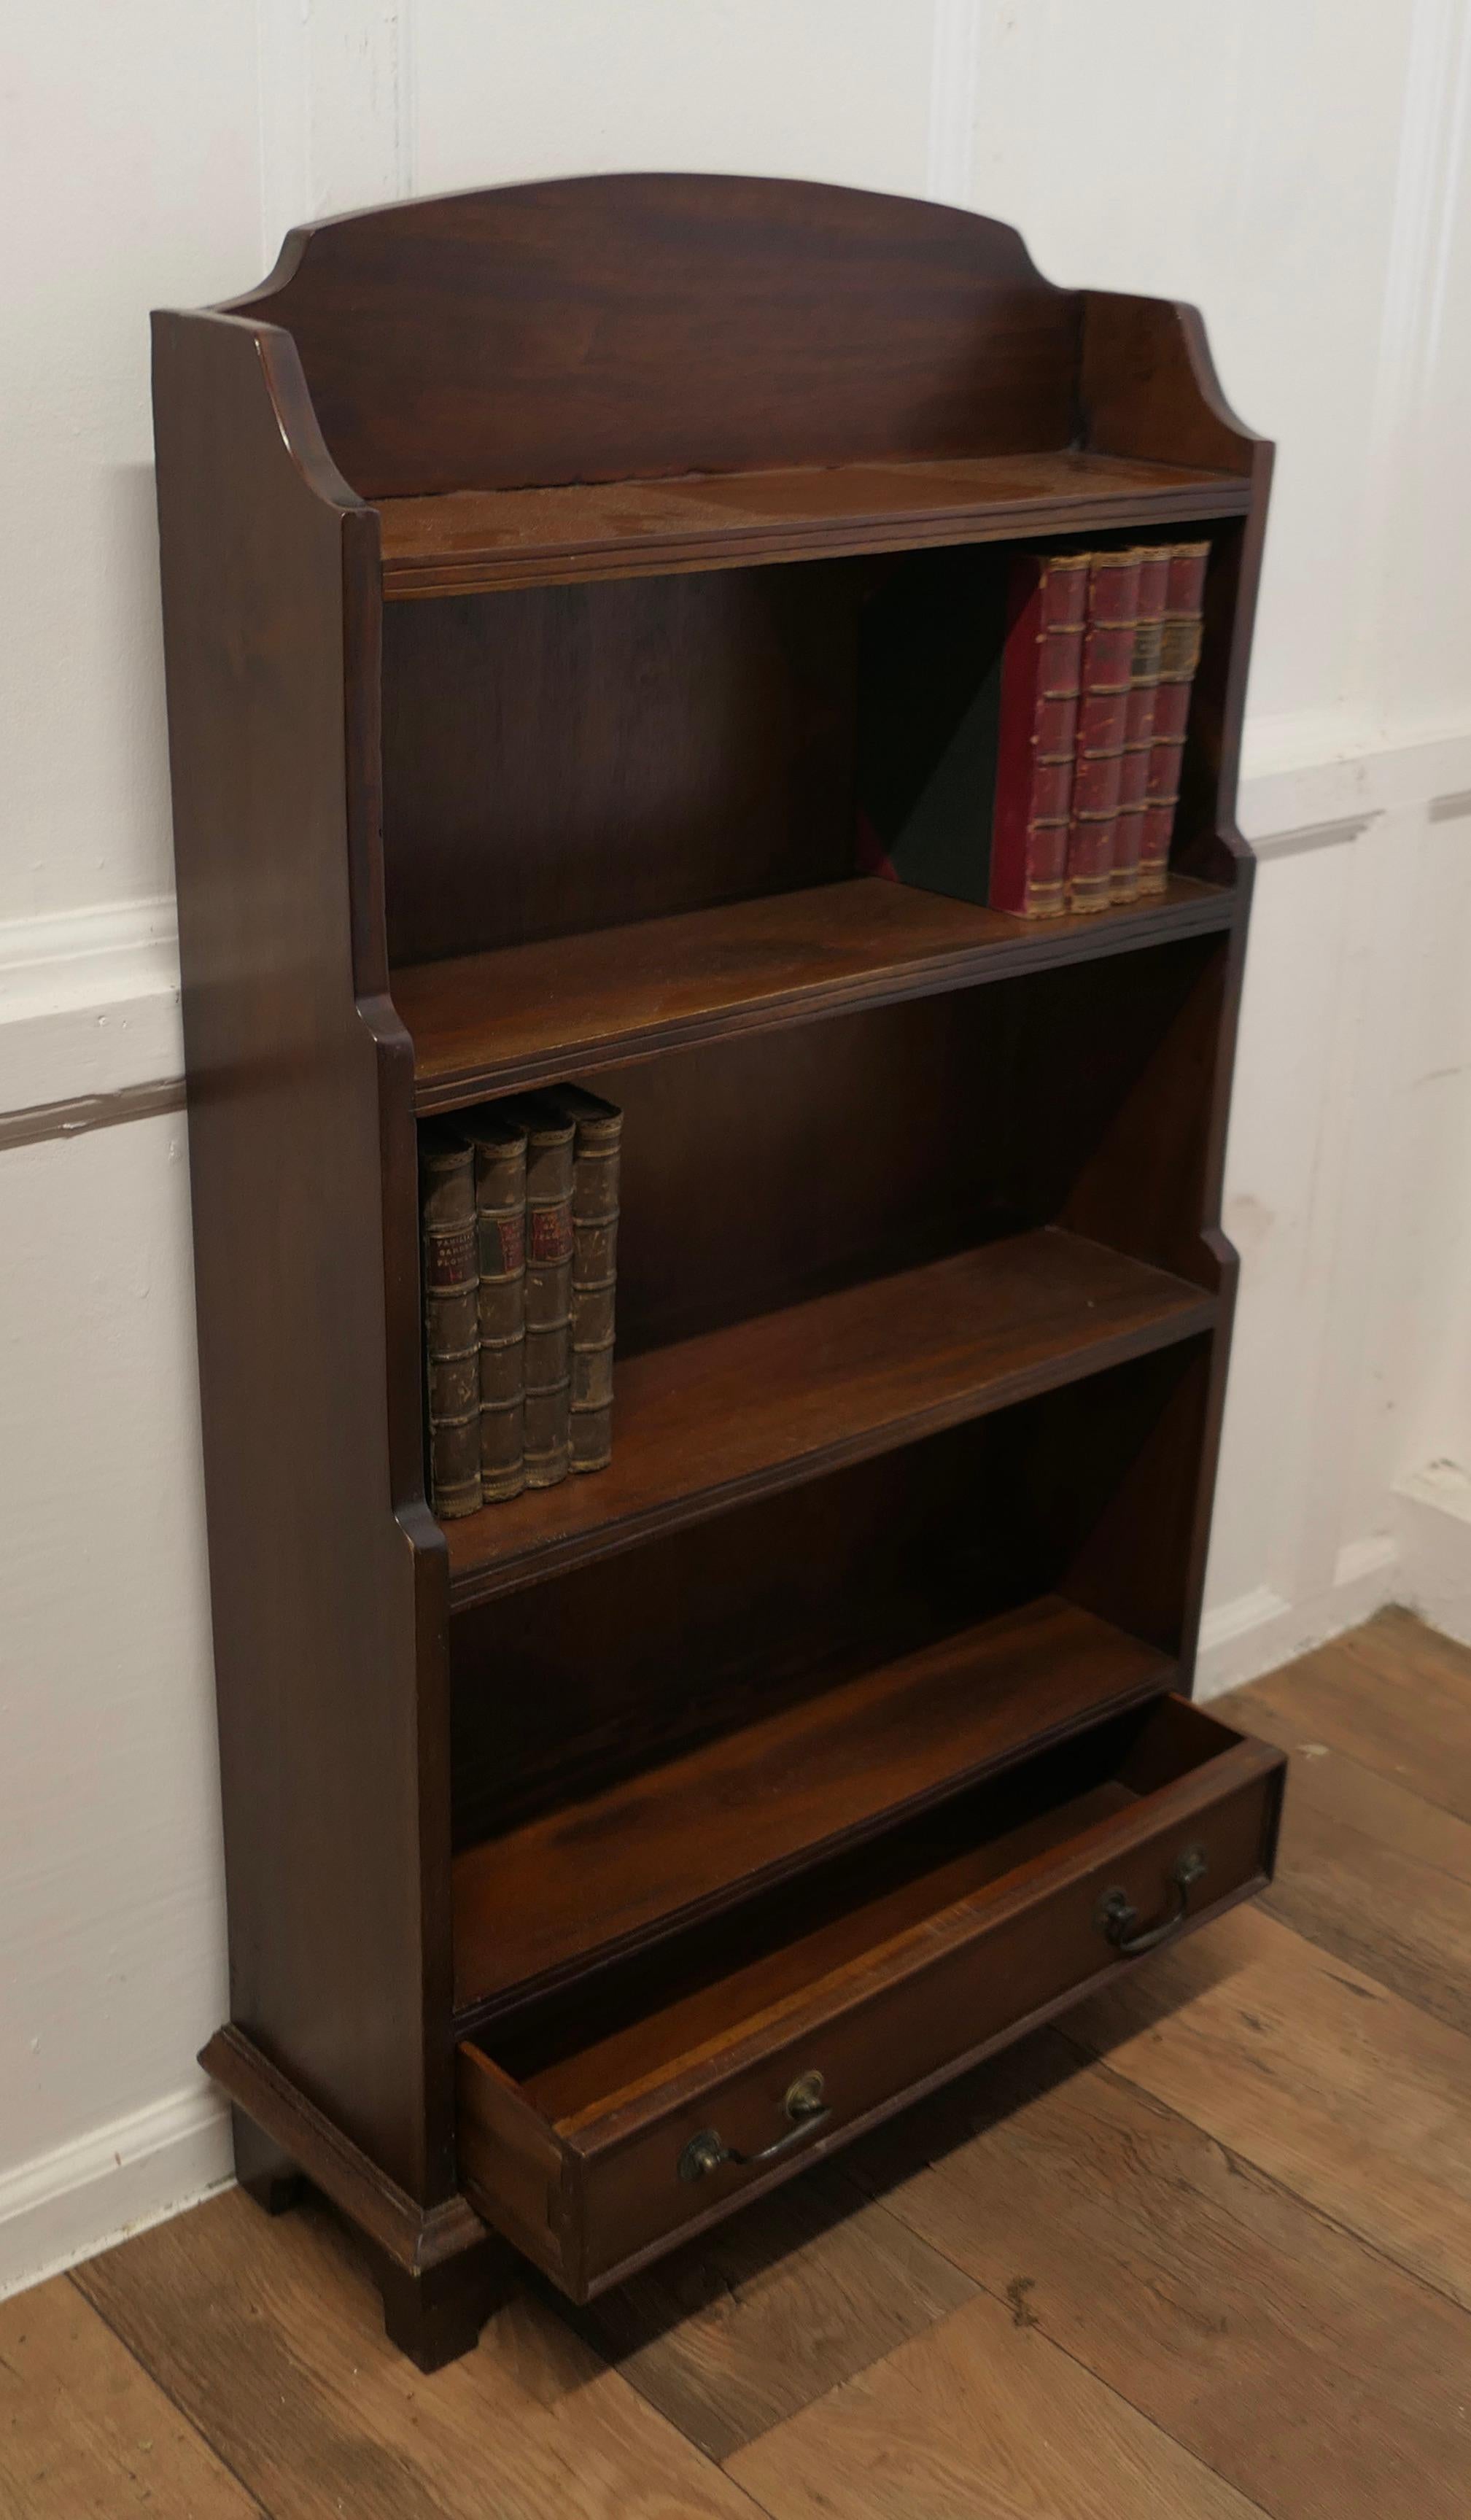 Walnut Art Deco Book Case with a Drawer at the Bottom For Sale